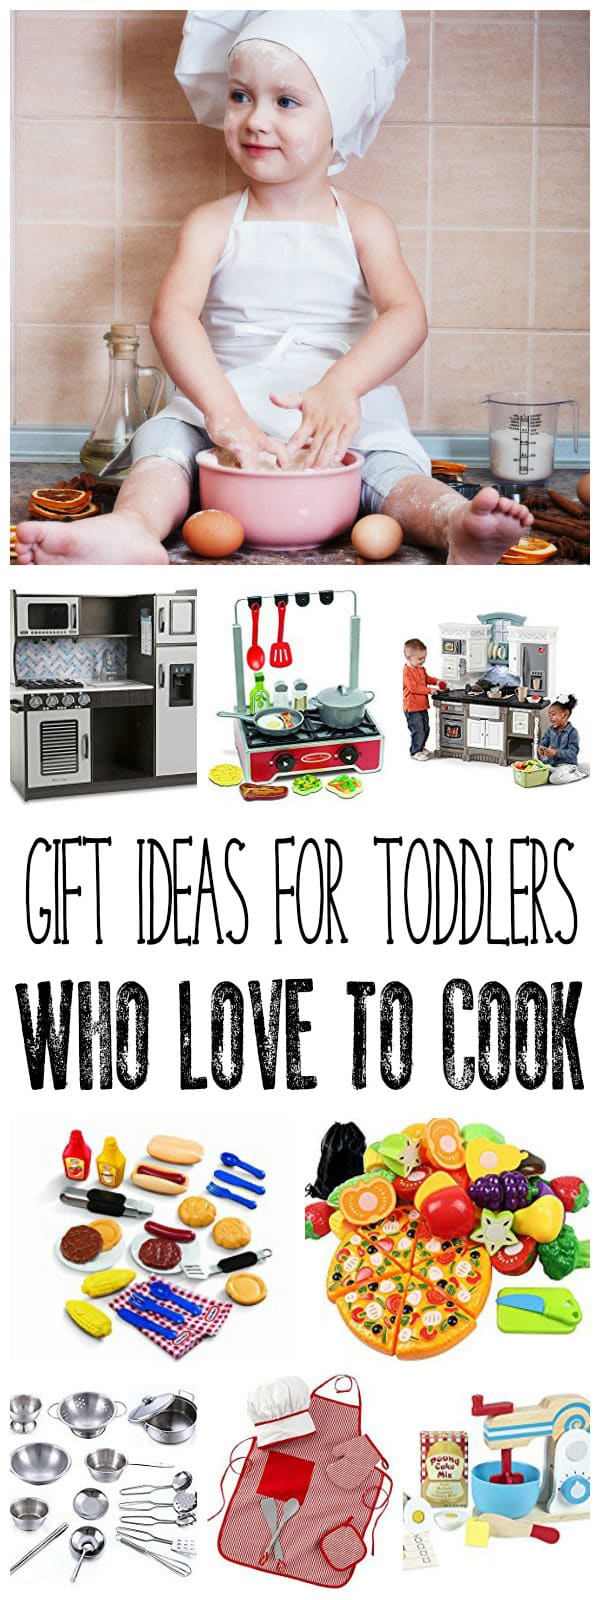 Encourage your toddlers love of cooking with these mess free cooking toys perfect for your little budding chefs to cook up a tea time treat for a pretend tea party.